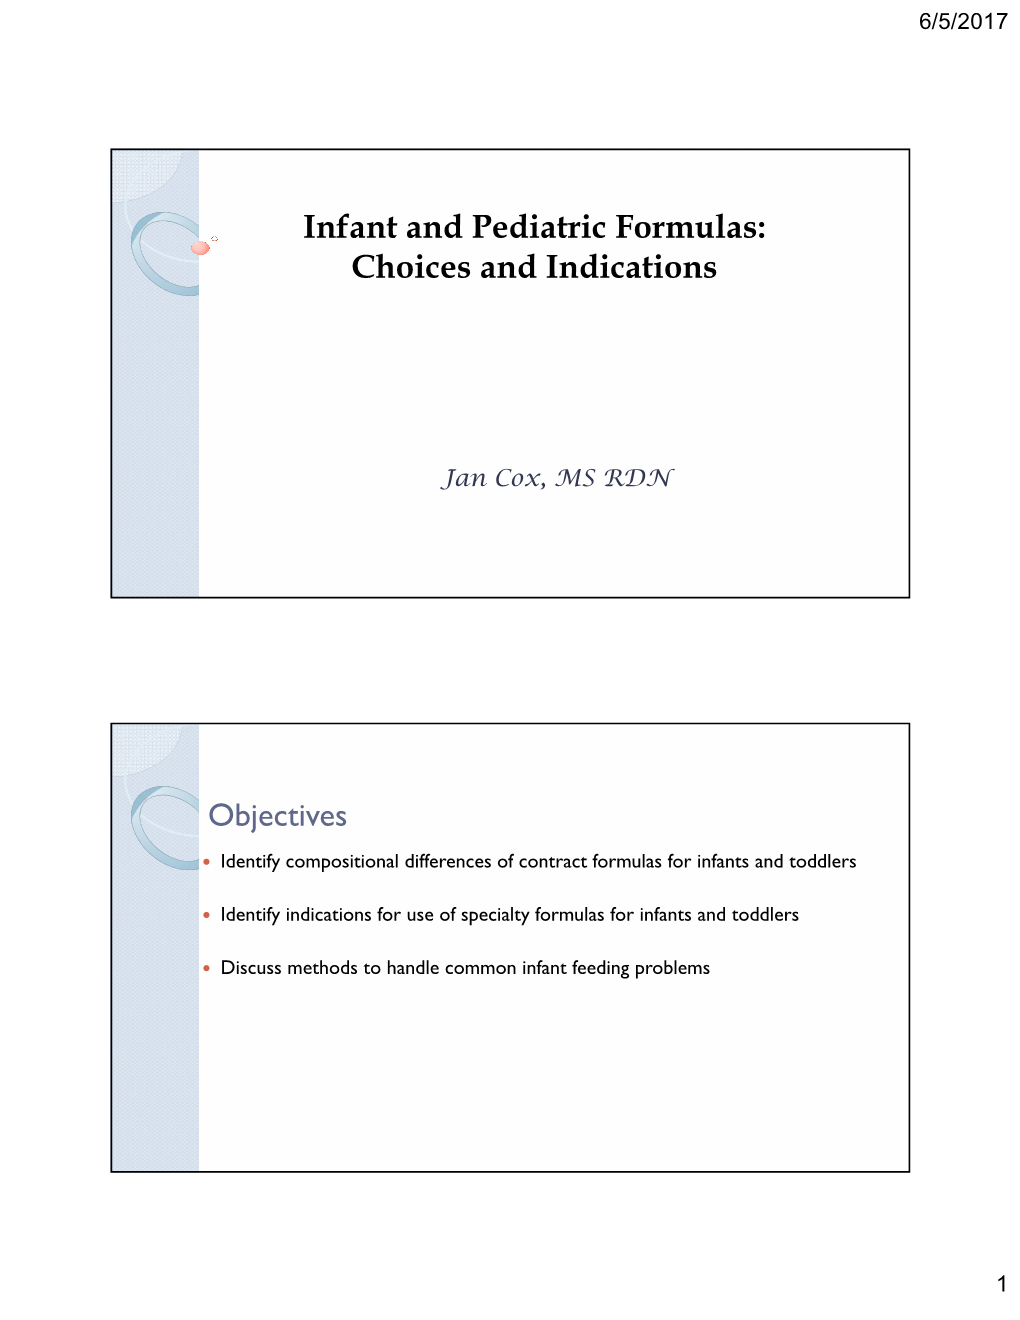 Infant and Pediatric Formulas: Choices and Indications